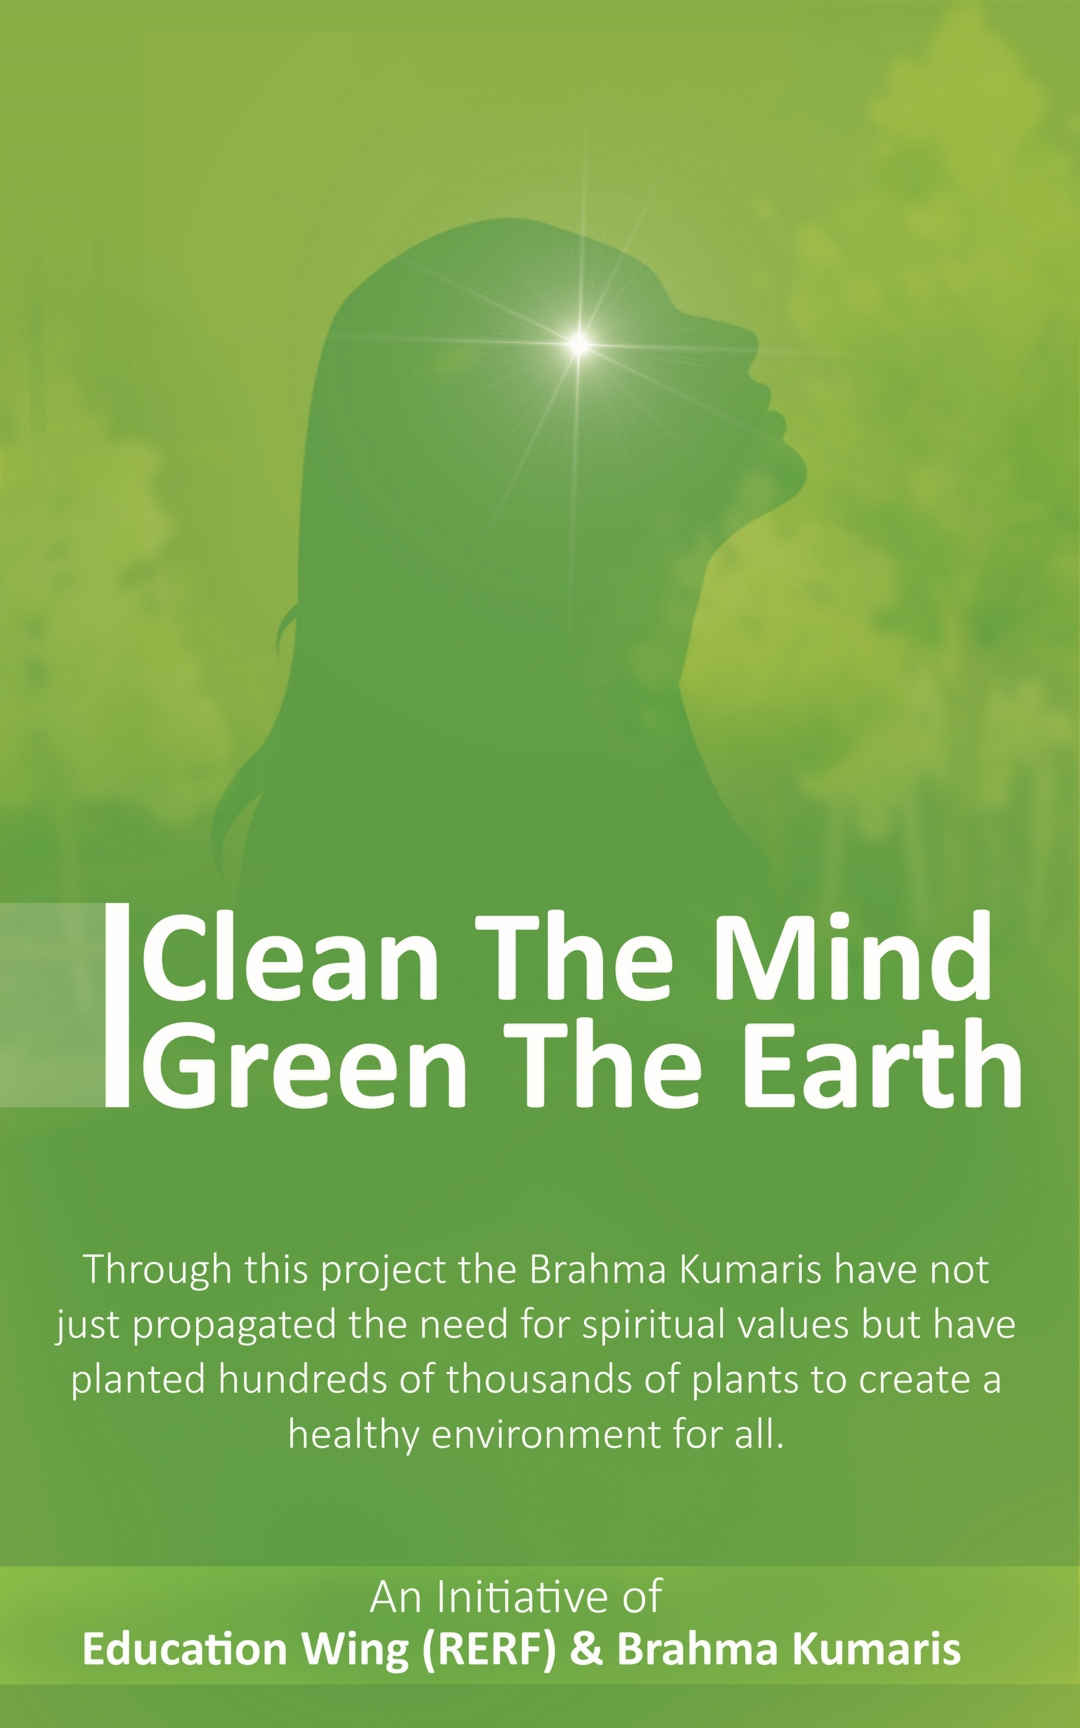 Clean the mind, green the earth